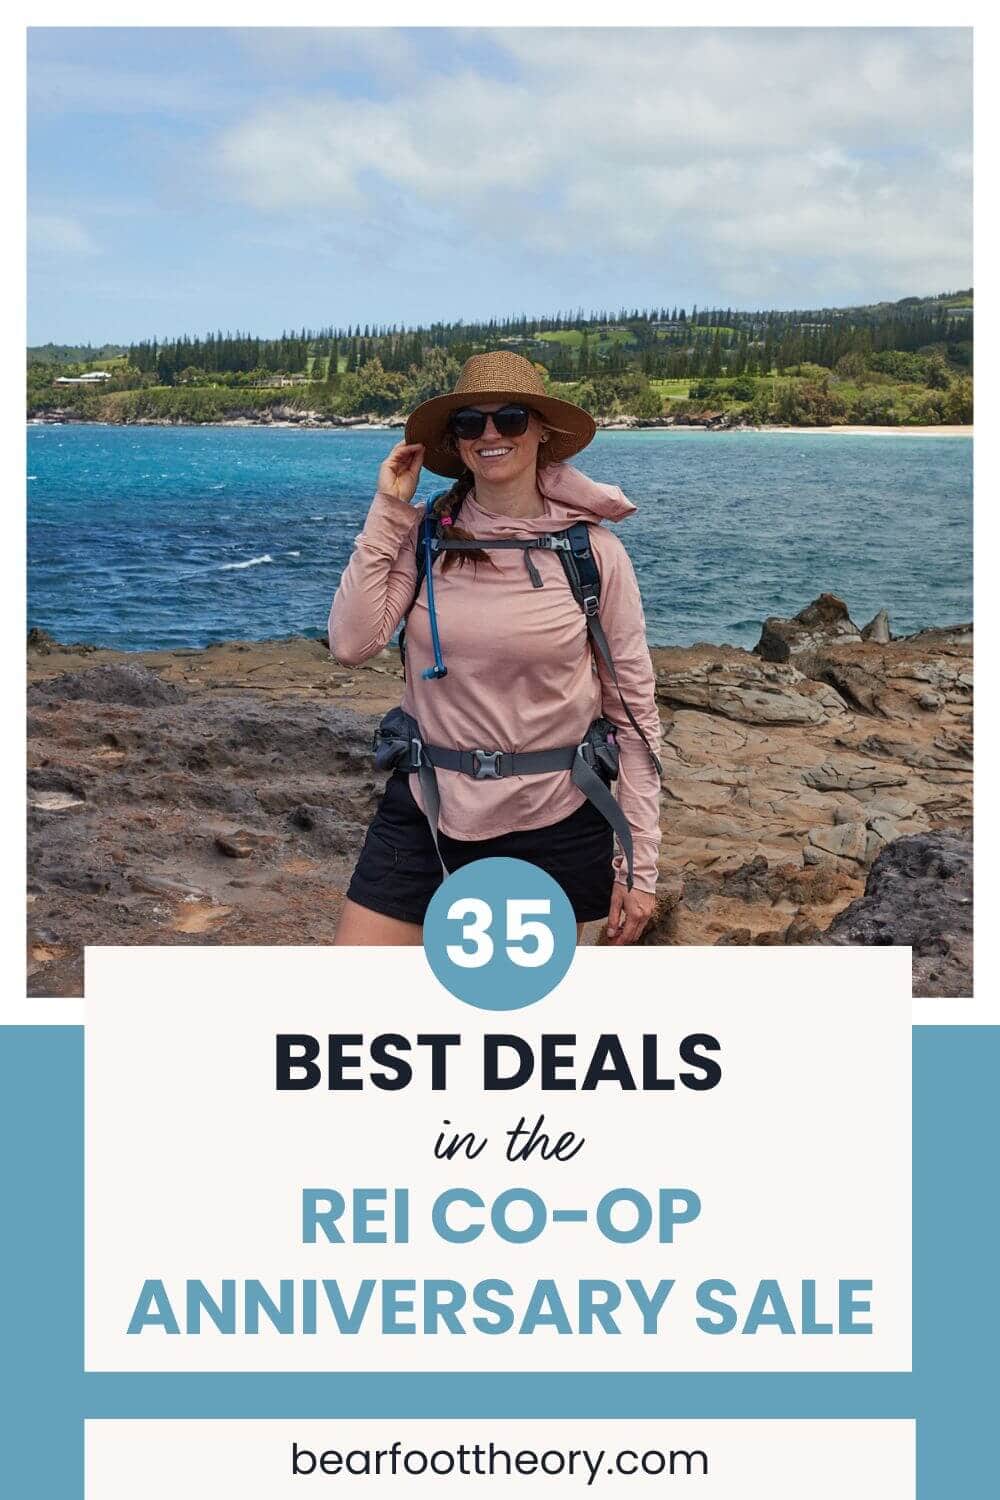 Explore the best deals during the REI Co-op Anniversary Sale including our favorite hiking, car camping, van life, and backpacking gear and apparel.